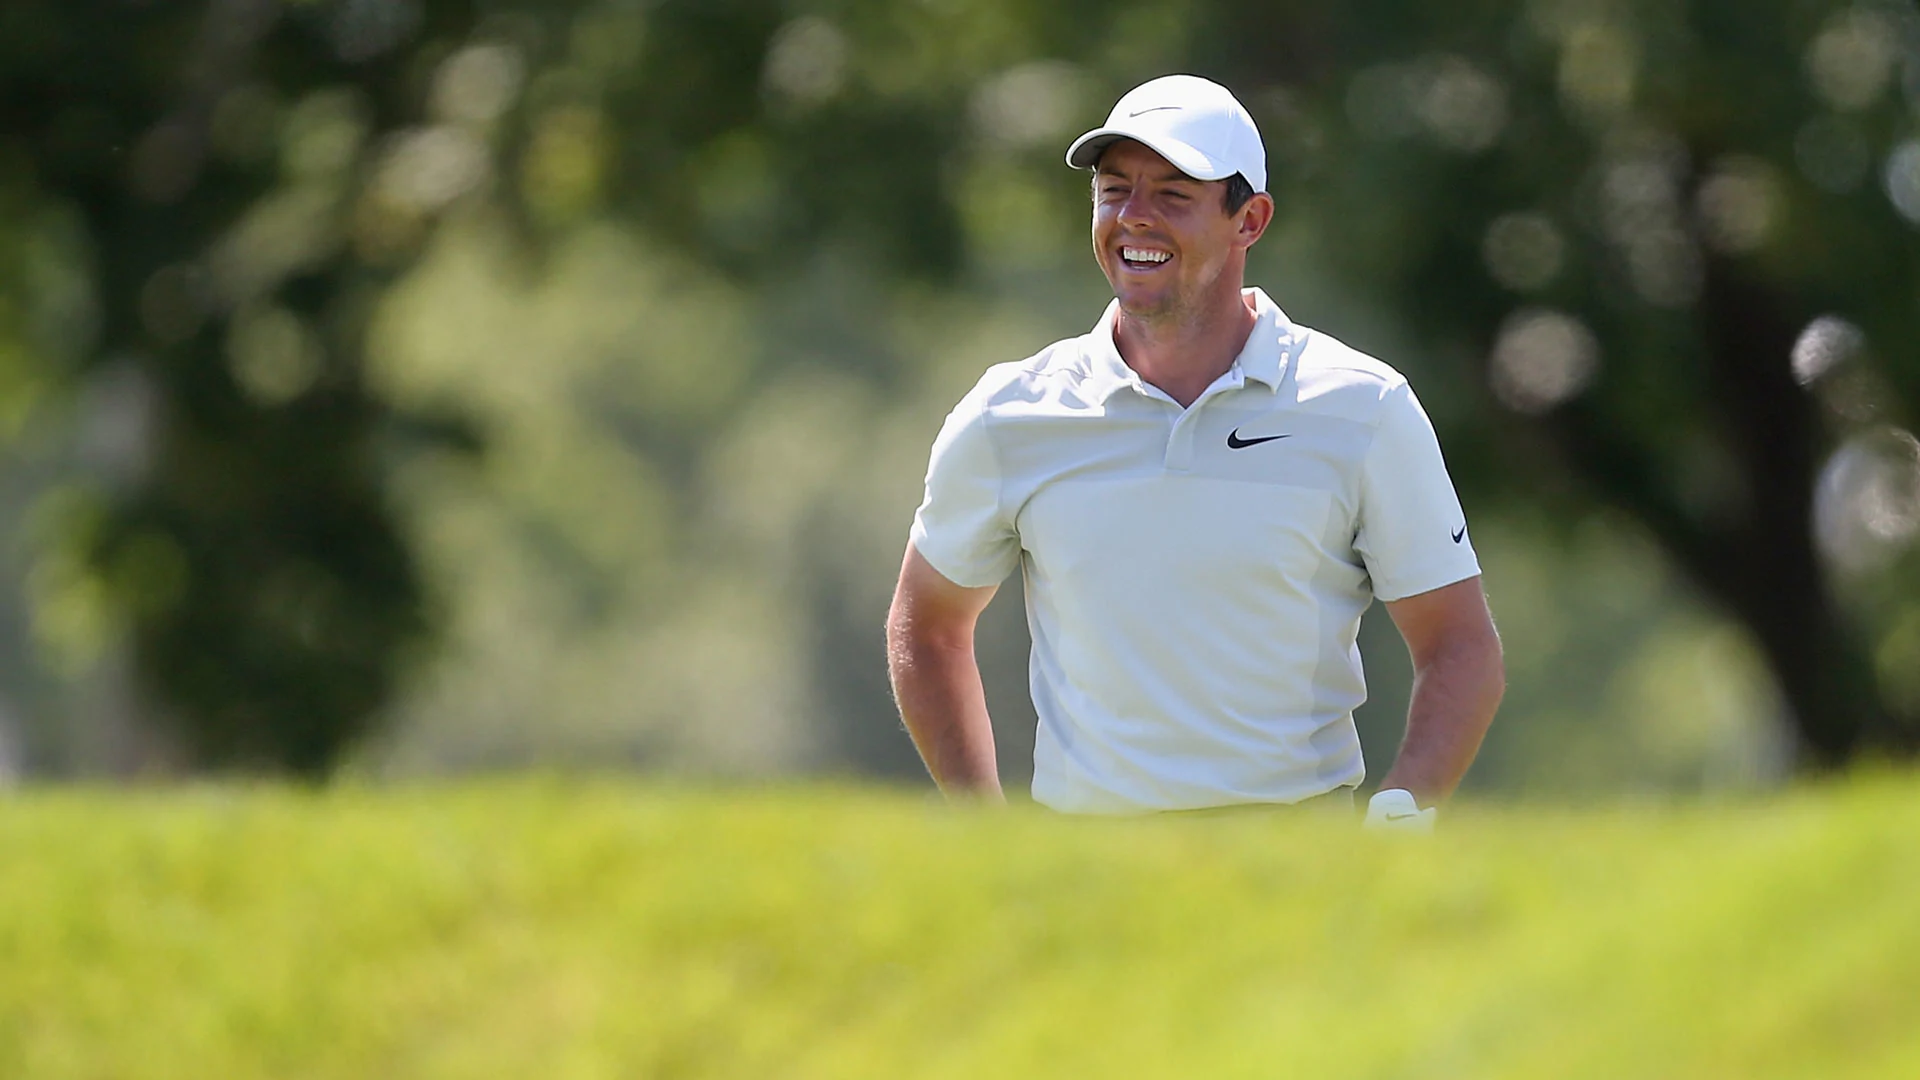 McIlroy: U.S. Open MC 'blessing in disguise'